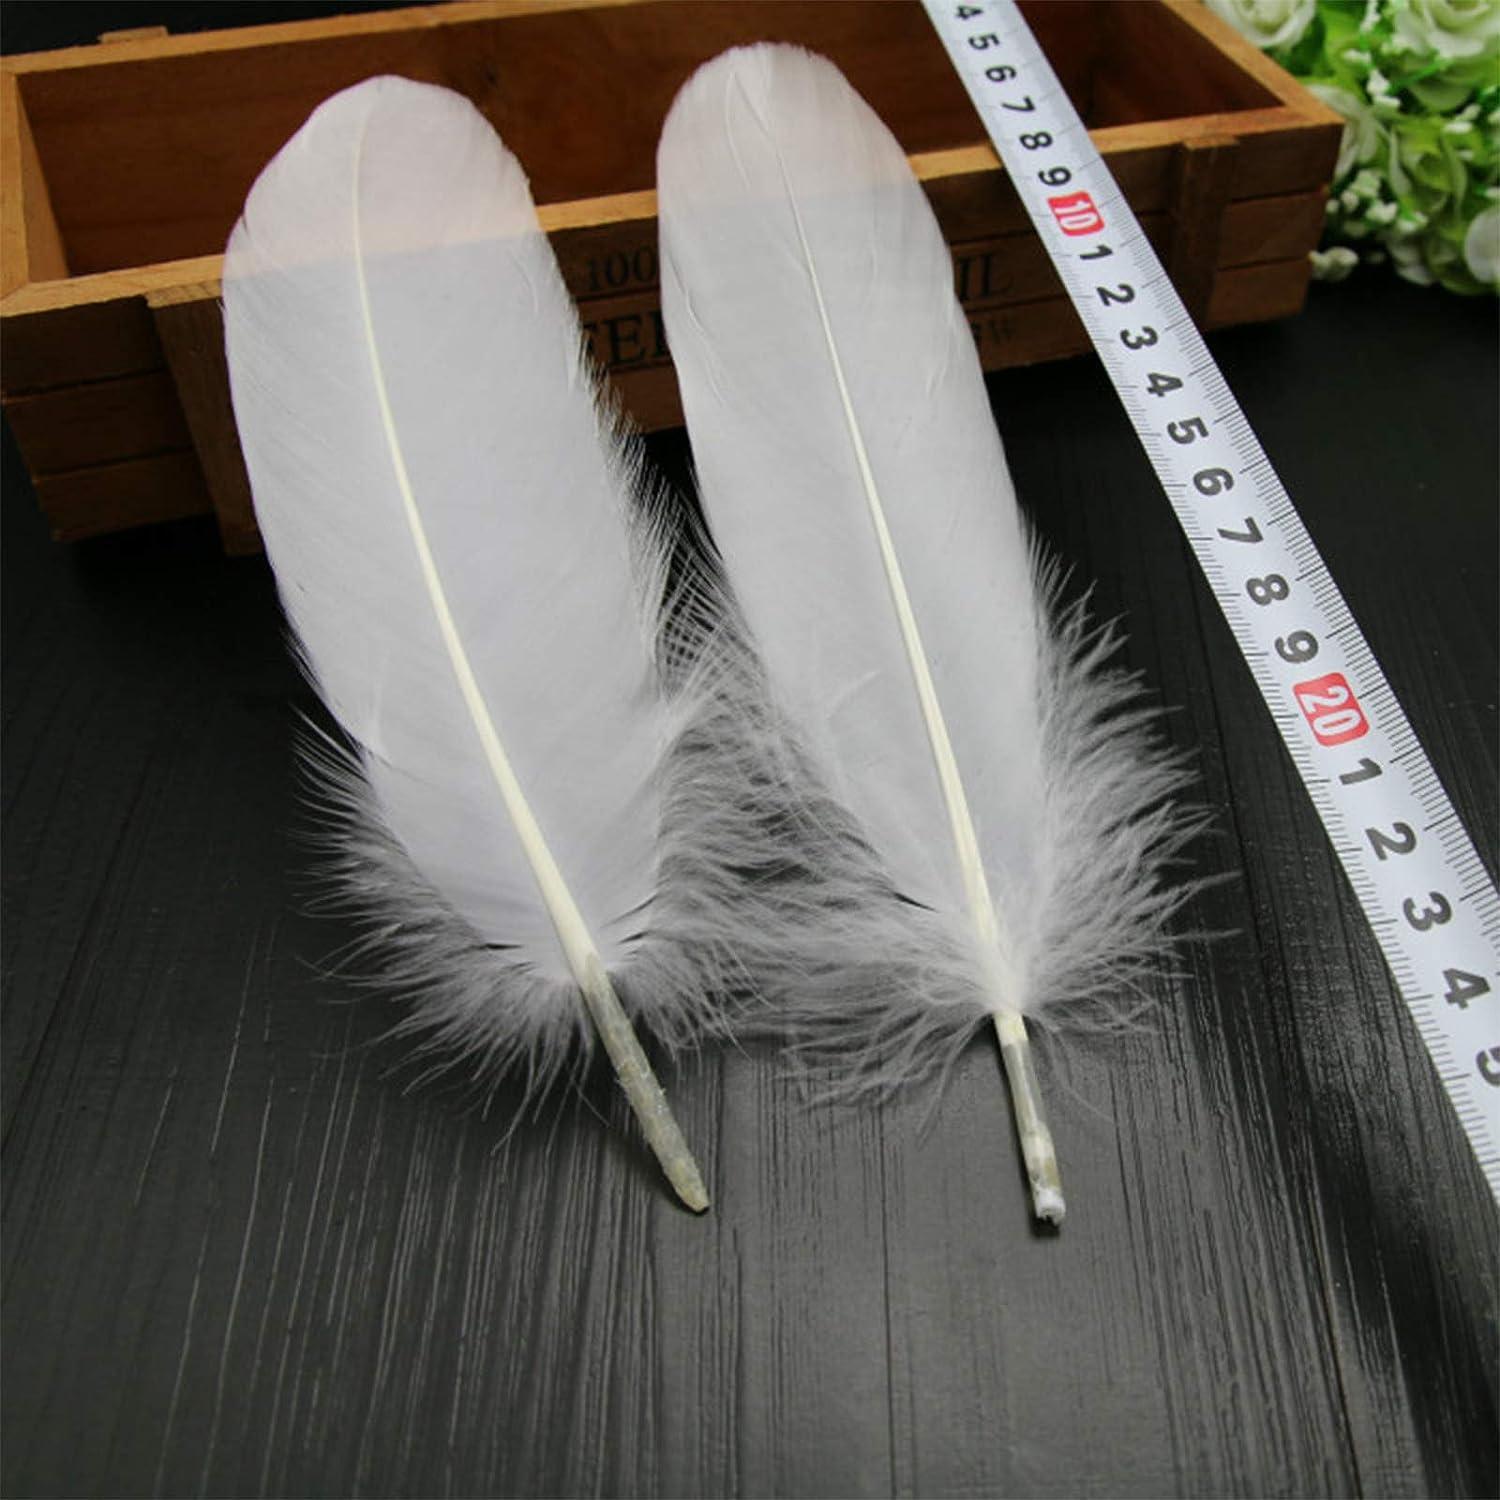 HaiMay 200 Pieces White Feathers for Craft Wedding Home Party Decorations  6-8 Inches Goose Feathers White Craft Feathers White 200 Pieces